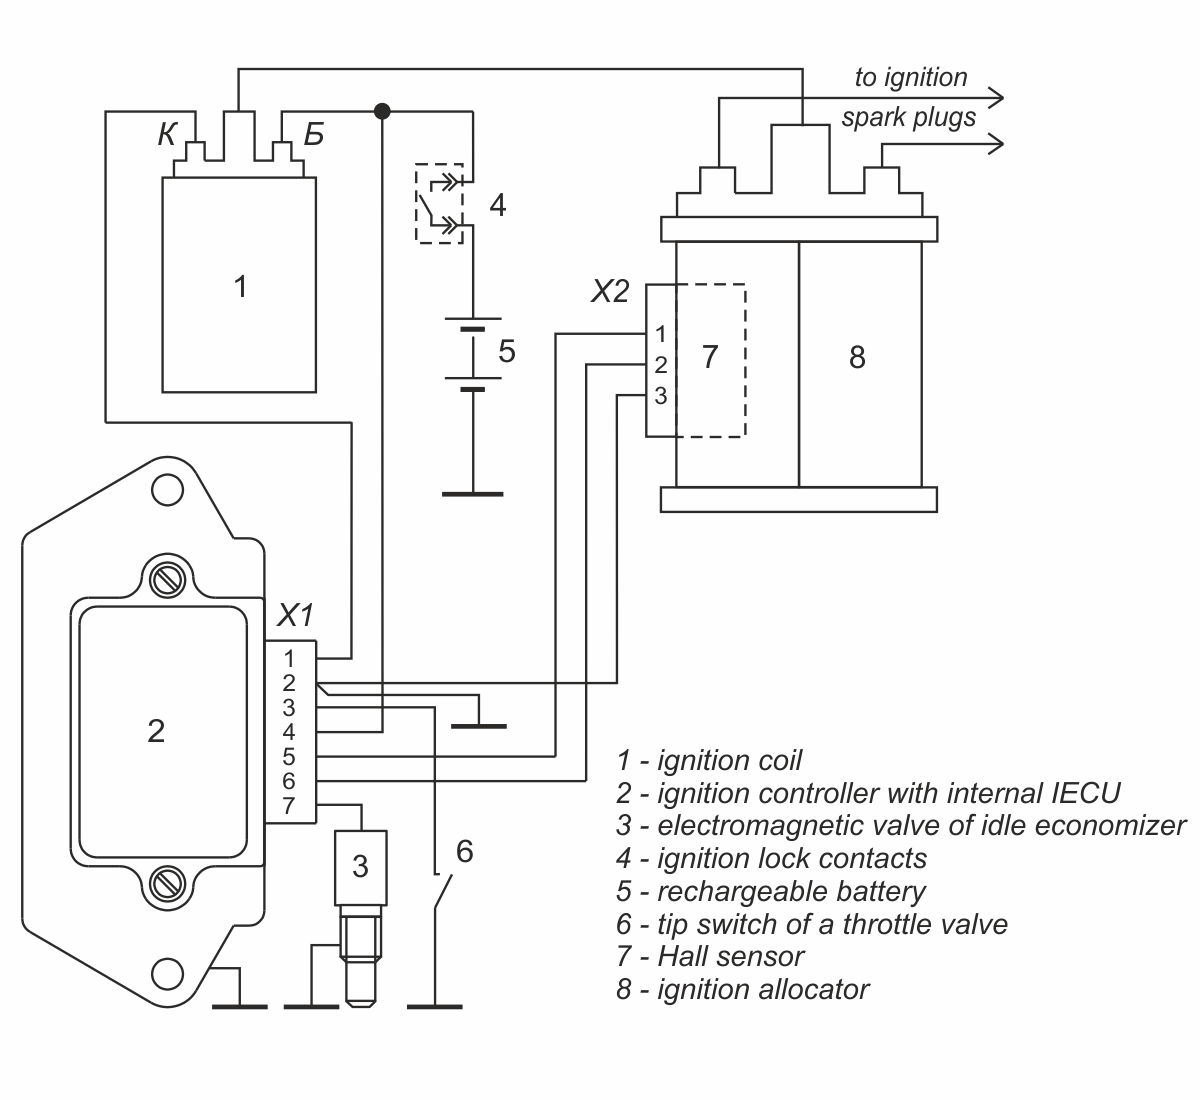 Connection diagram of ignition controller 1103.3734